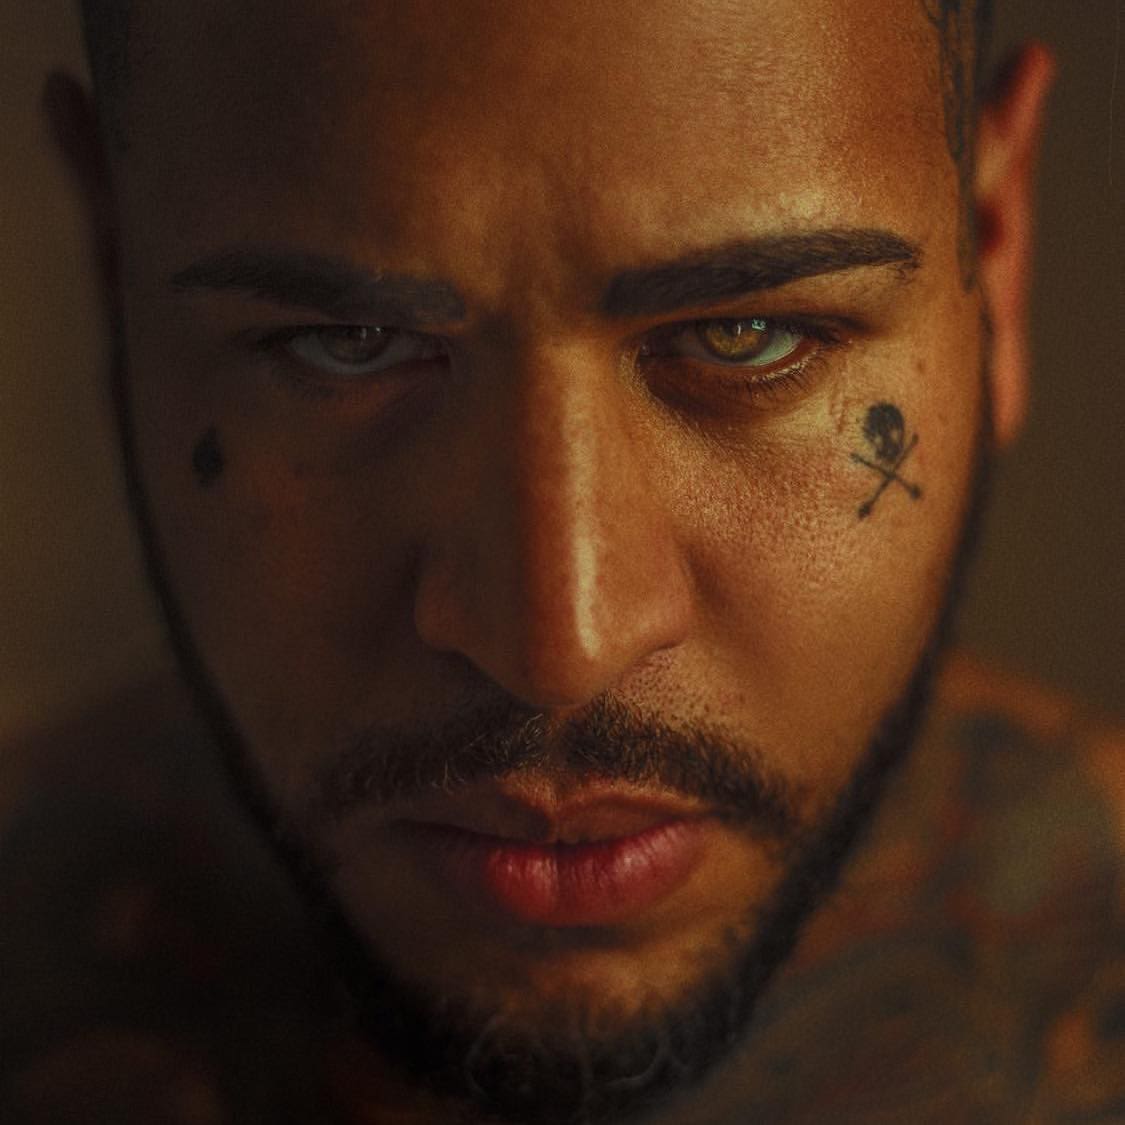 Tommy Vext